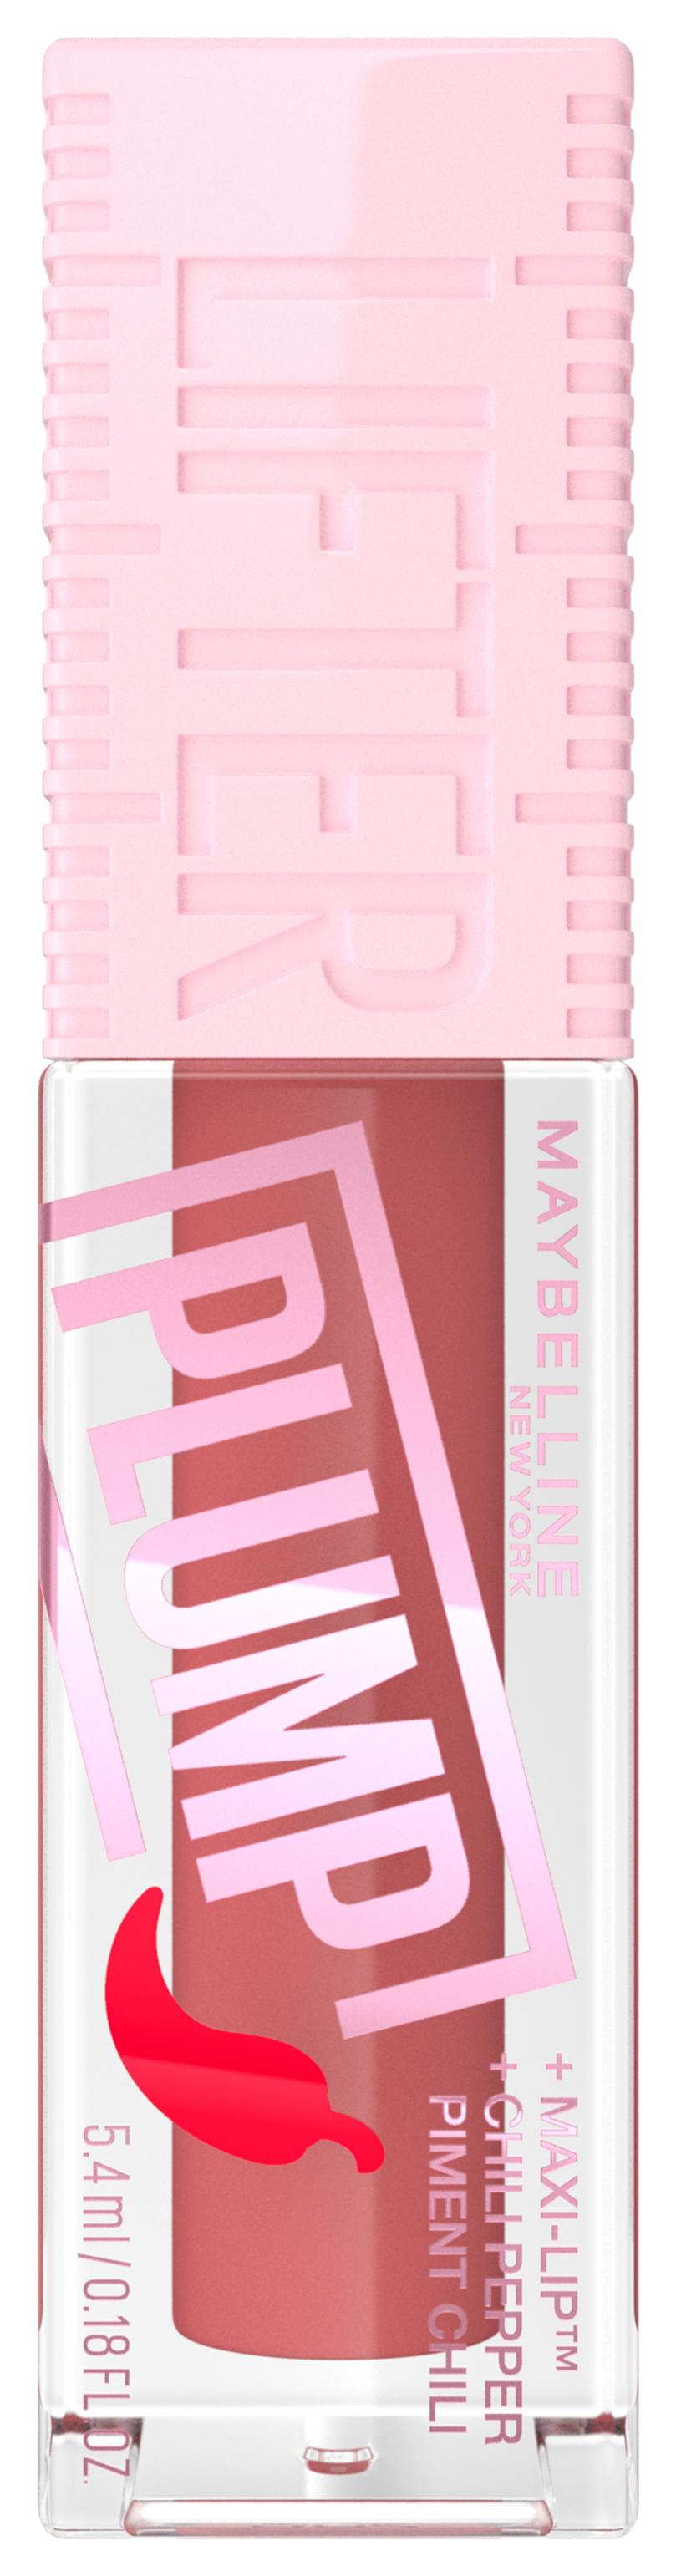 Maybelline NY Lips - Lifter Plump – Lipgloss Nr. 005 Peach Fever